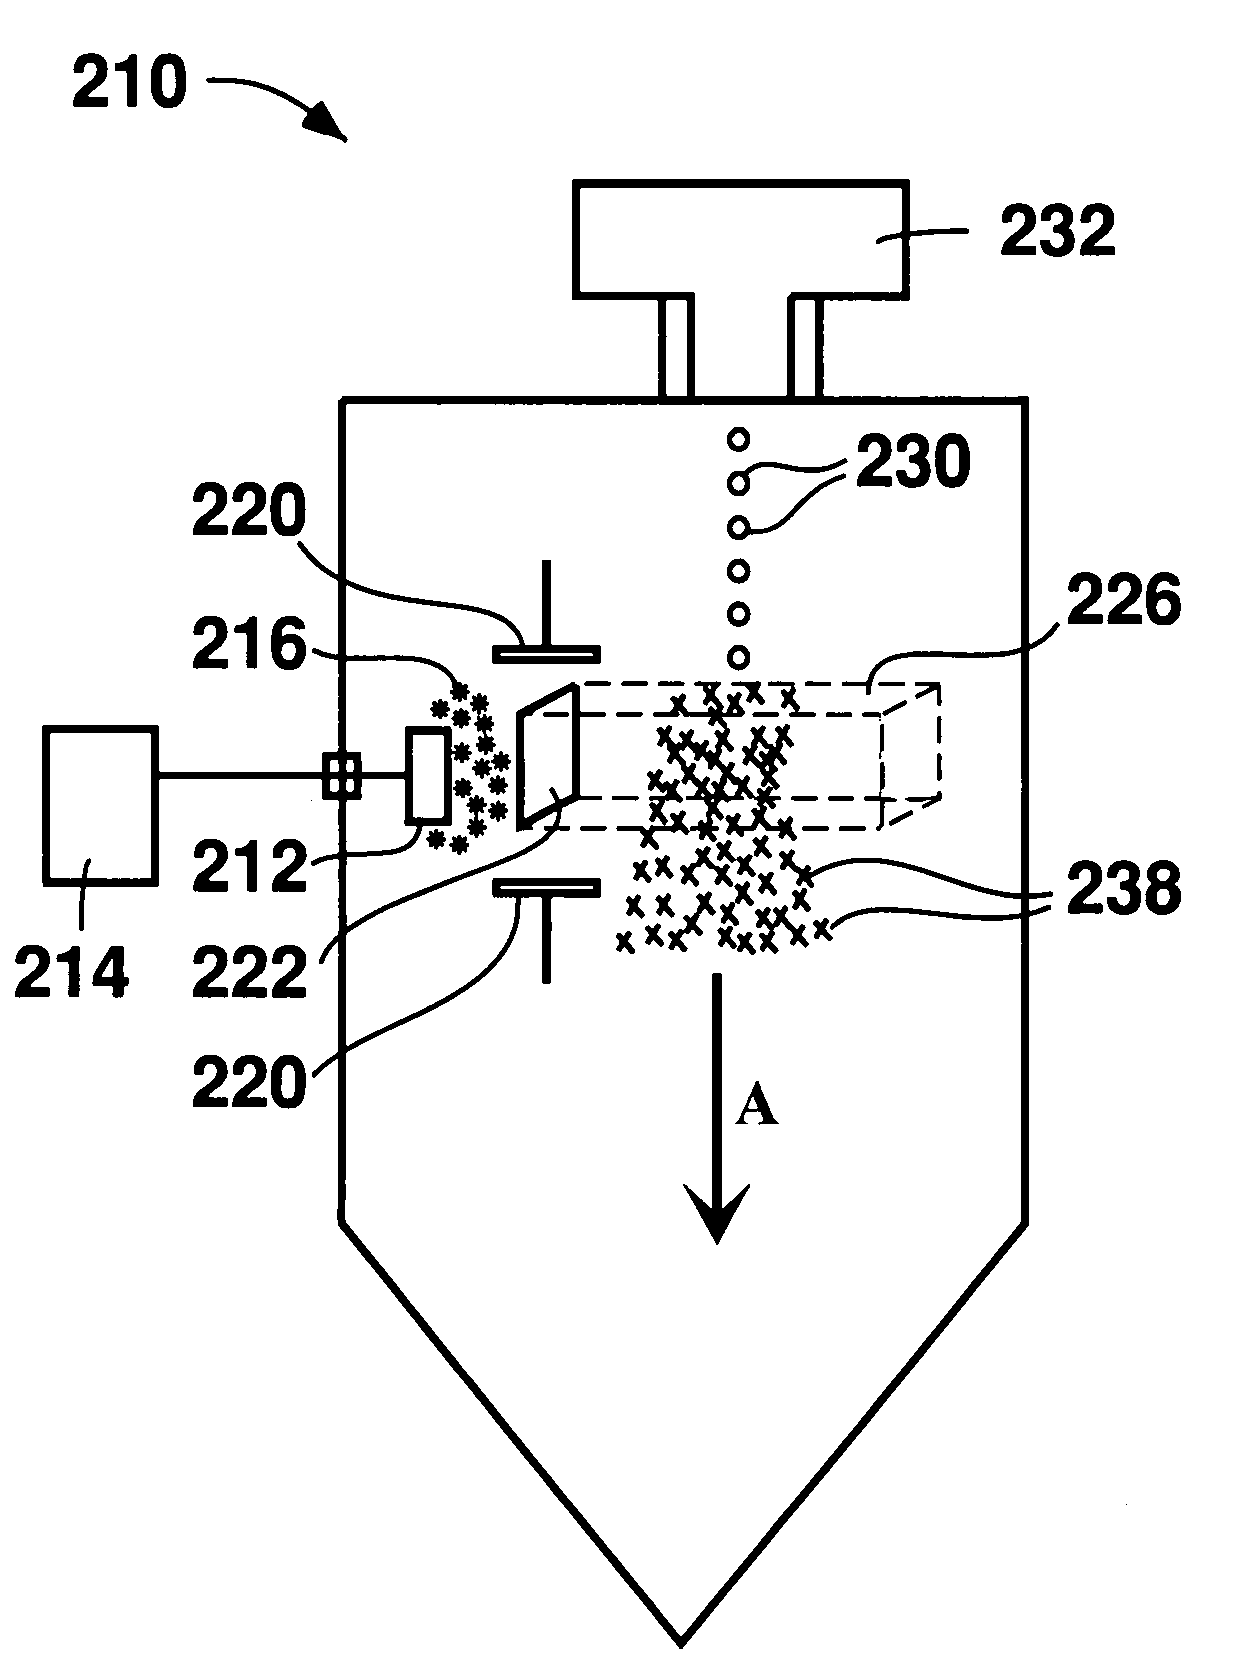 Apparatus and method for clean, rapidly solidified alloys